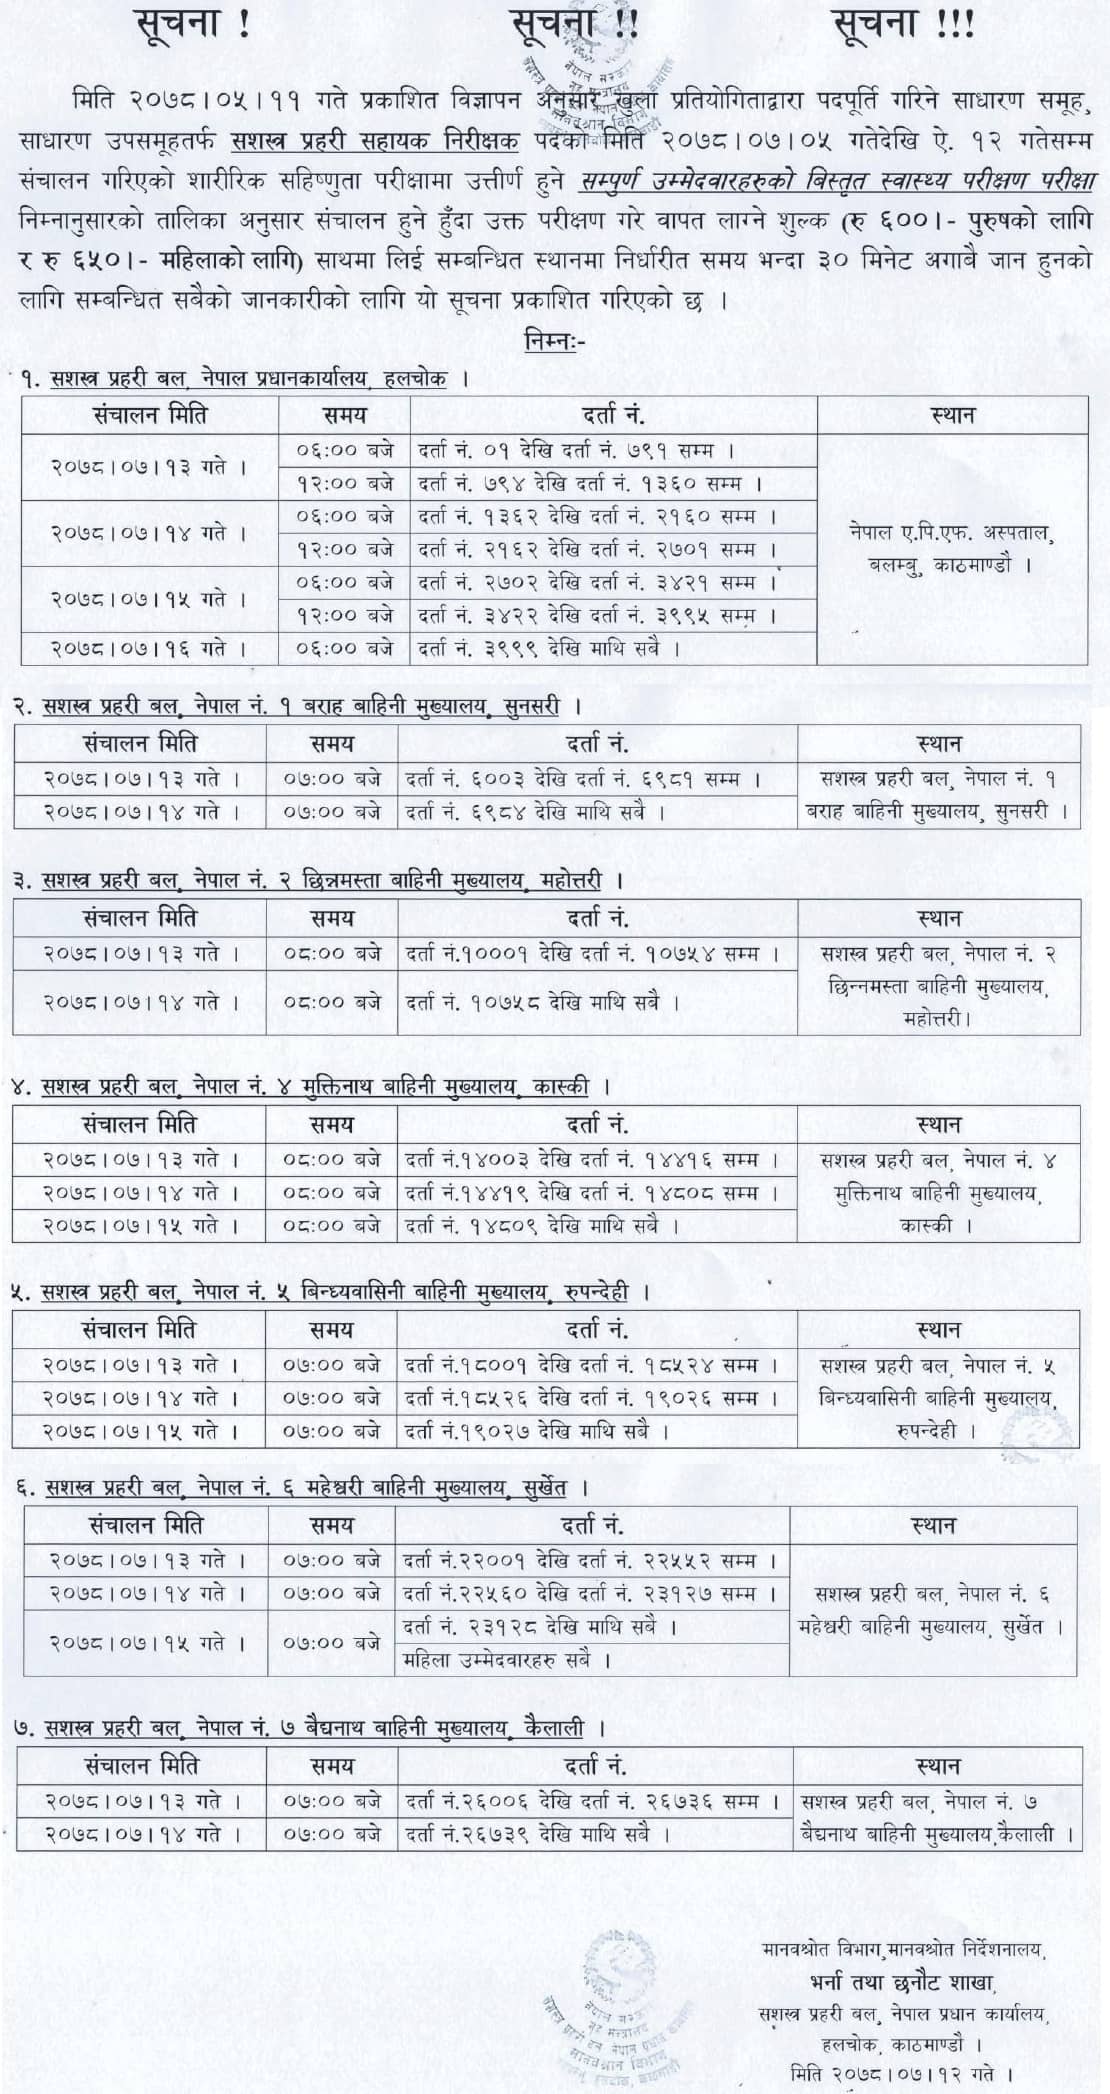 APF Nepal Published ASI Post Medical Examination Schedule